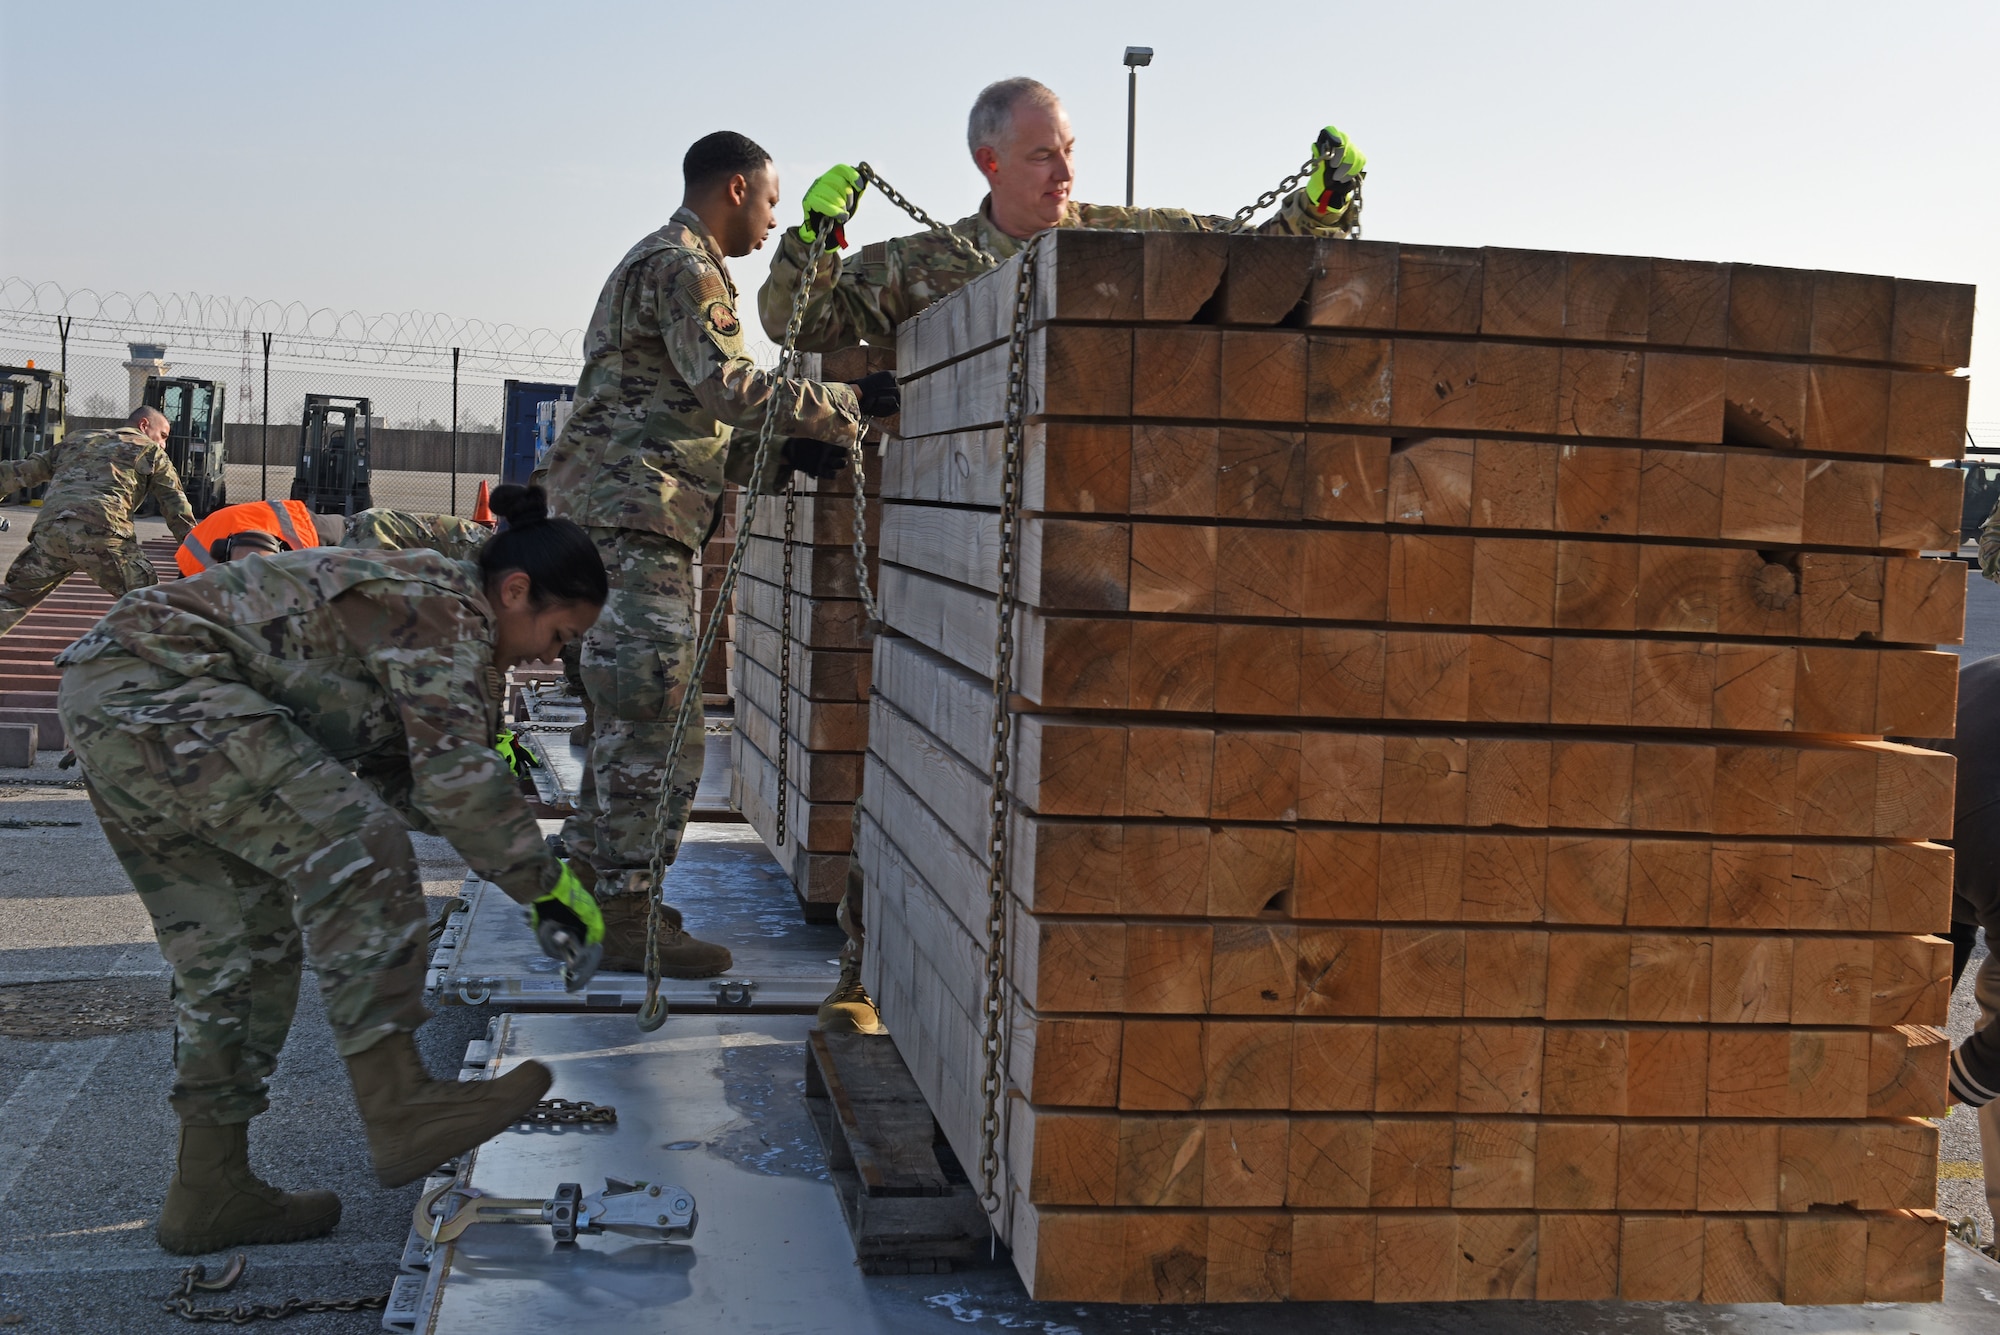 U.S. Air Force Maj. Gen. John Gordy, U.S. Air Force Expeditionary Center commander, assists his team during a pallet building competition with Airmen from the 724th Air Mobility Squadron and the 31st Logistics Readiness Squadron at Aviano Air Base, Italy, Jan. 24, 2020. The competition was part of a site visit conducted by the USAF Expeditionary Center as part of a larger visit to the geographically separated units under the 521st Air Mobility Operations Wing’s area of responsibility.